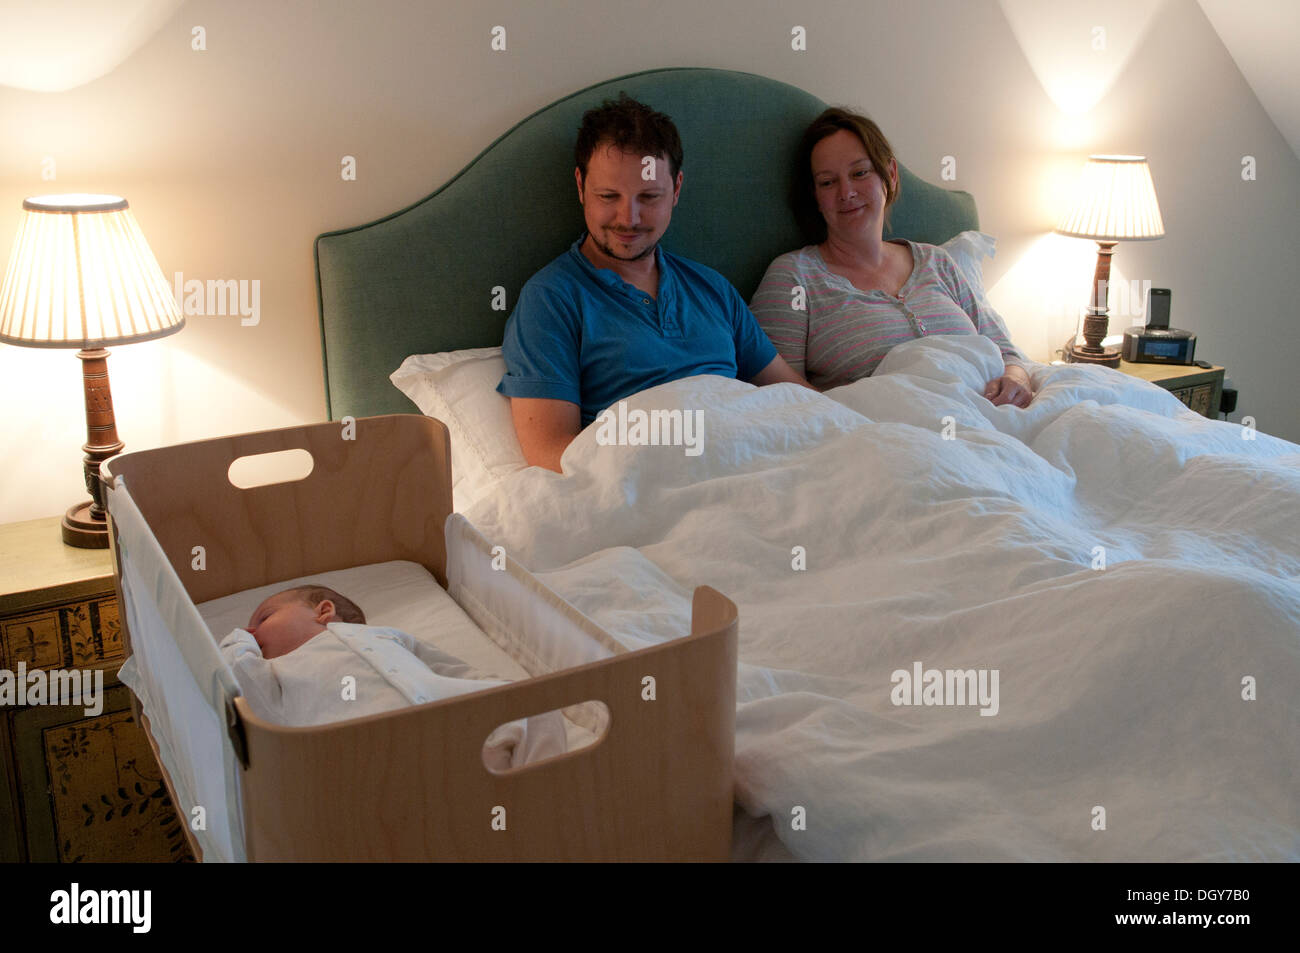 New parents in bed awake smiling and looking at their baby girl sleeping Stock Photo